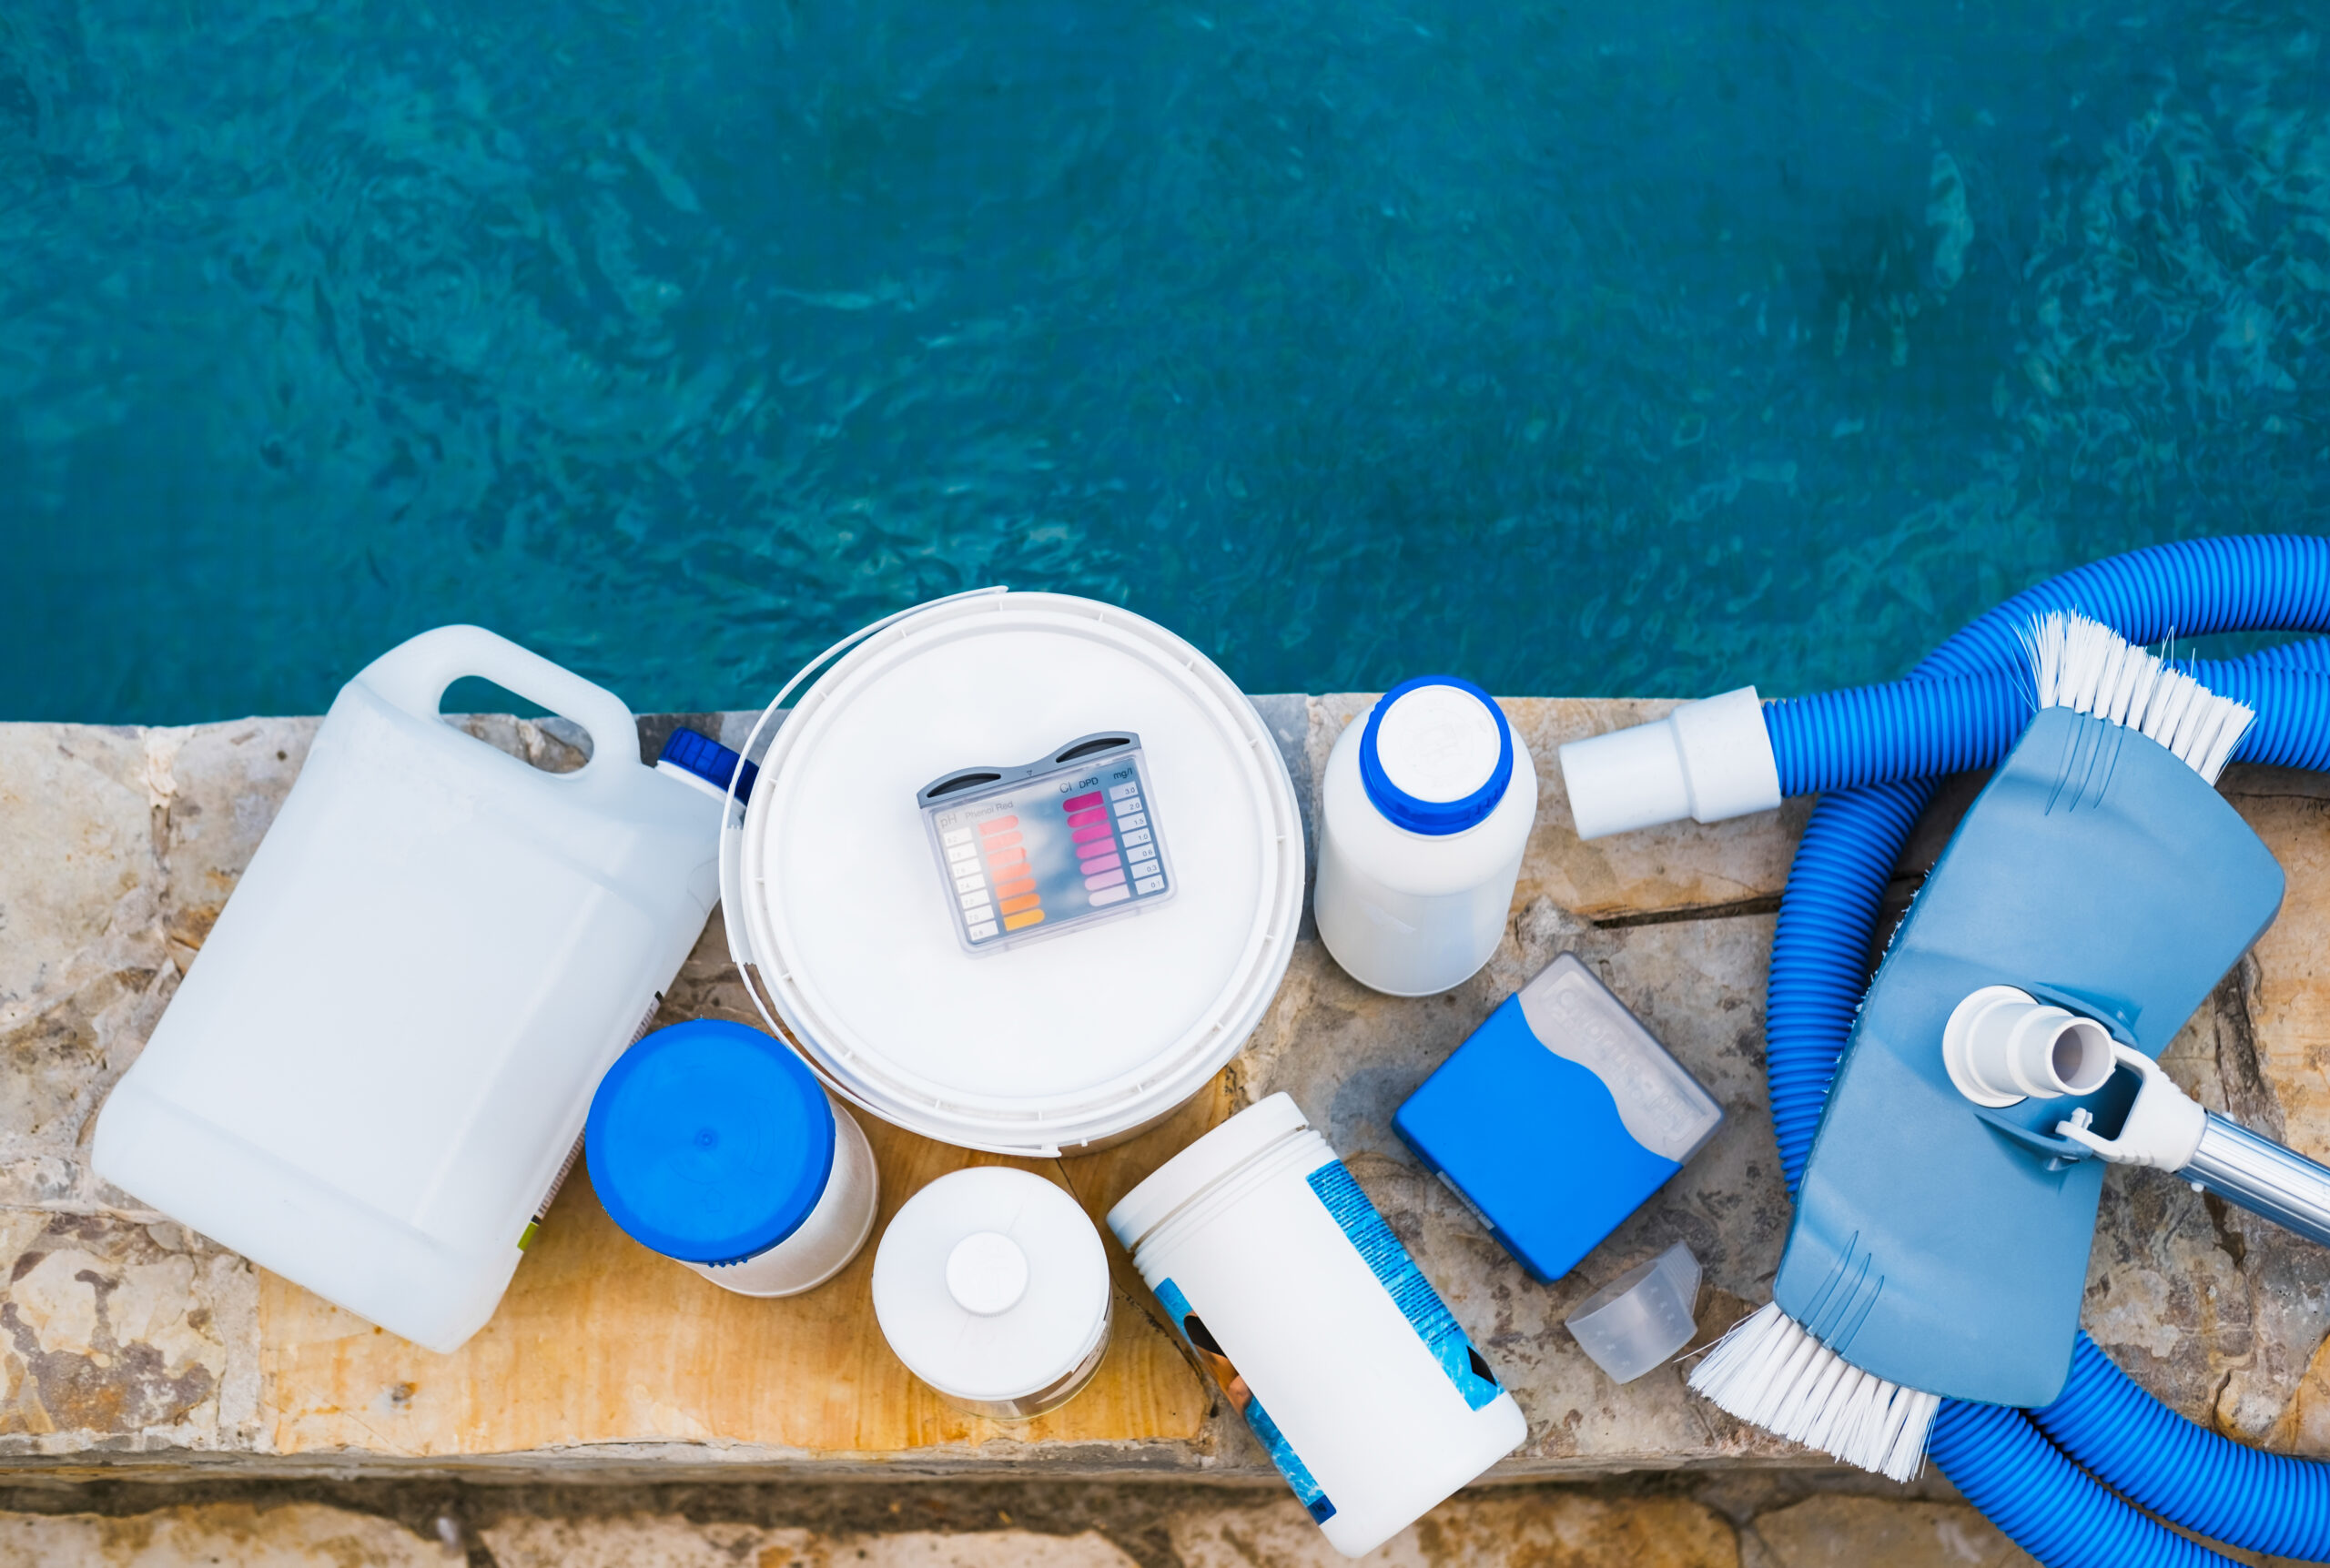 Various pool cleaning materials including a pool skimmer, vacuum head, pool brush, and chemical test kit